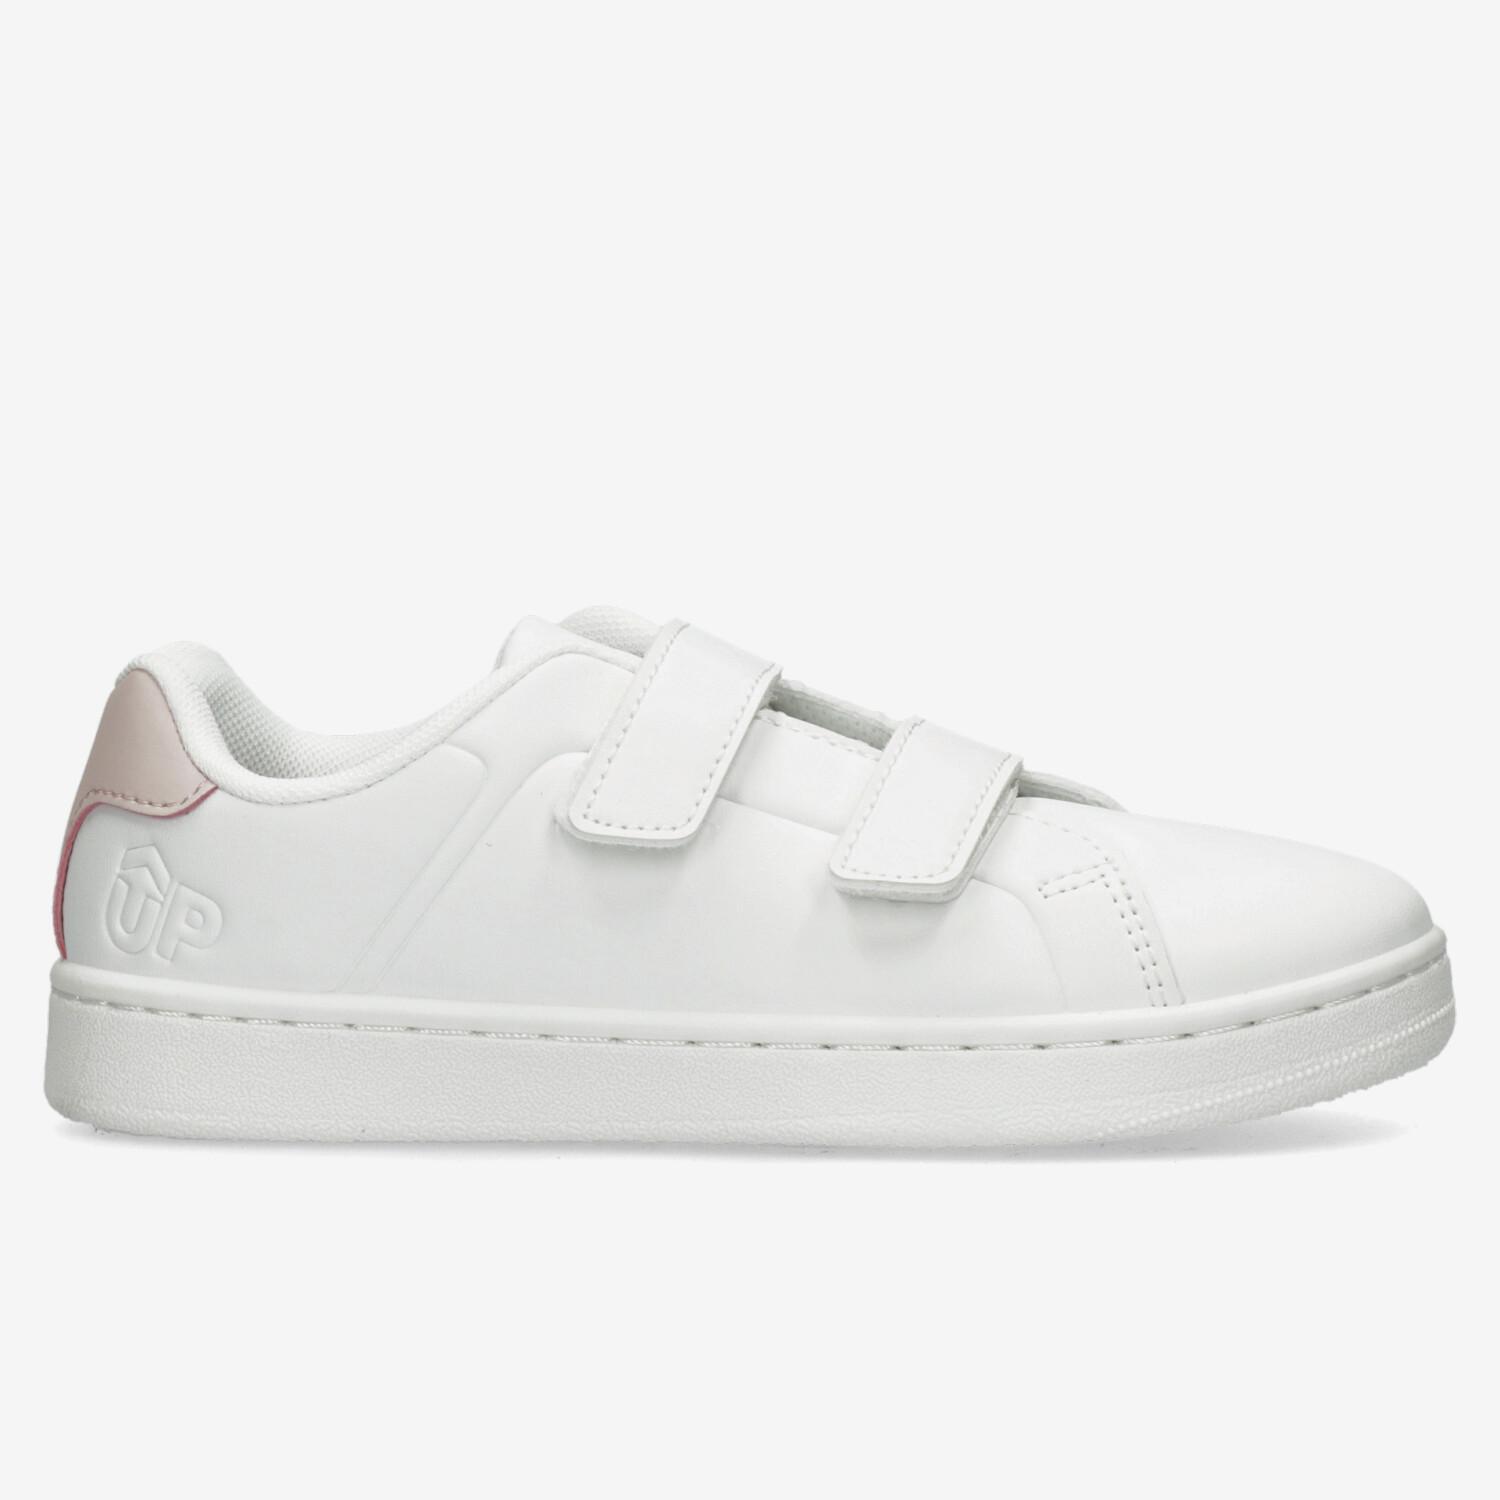 Up Arena - Blanc - Chaussures Velcro Fille sports taille 32